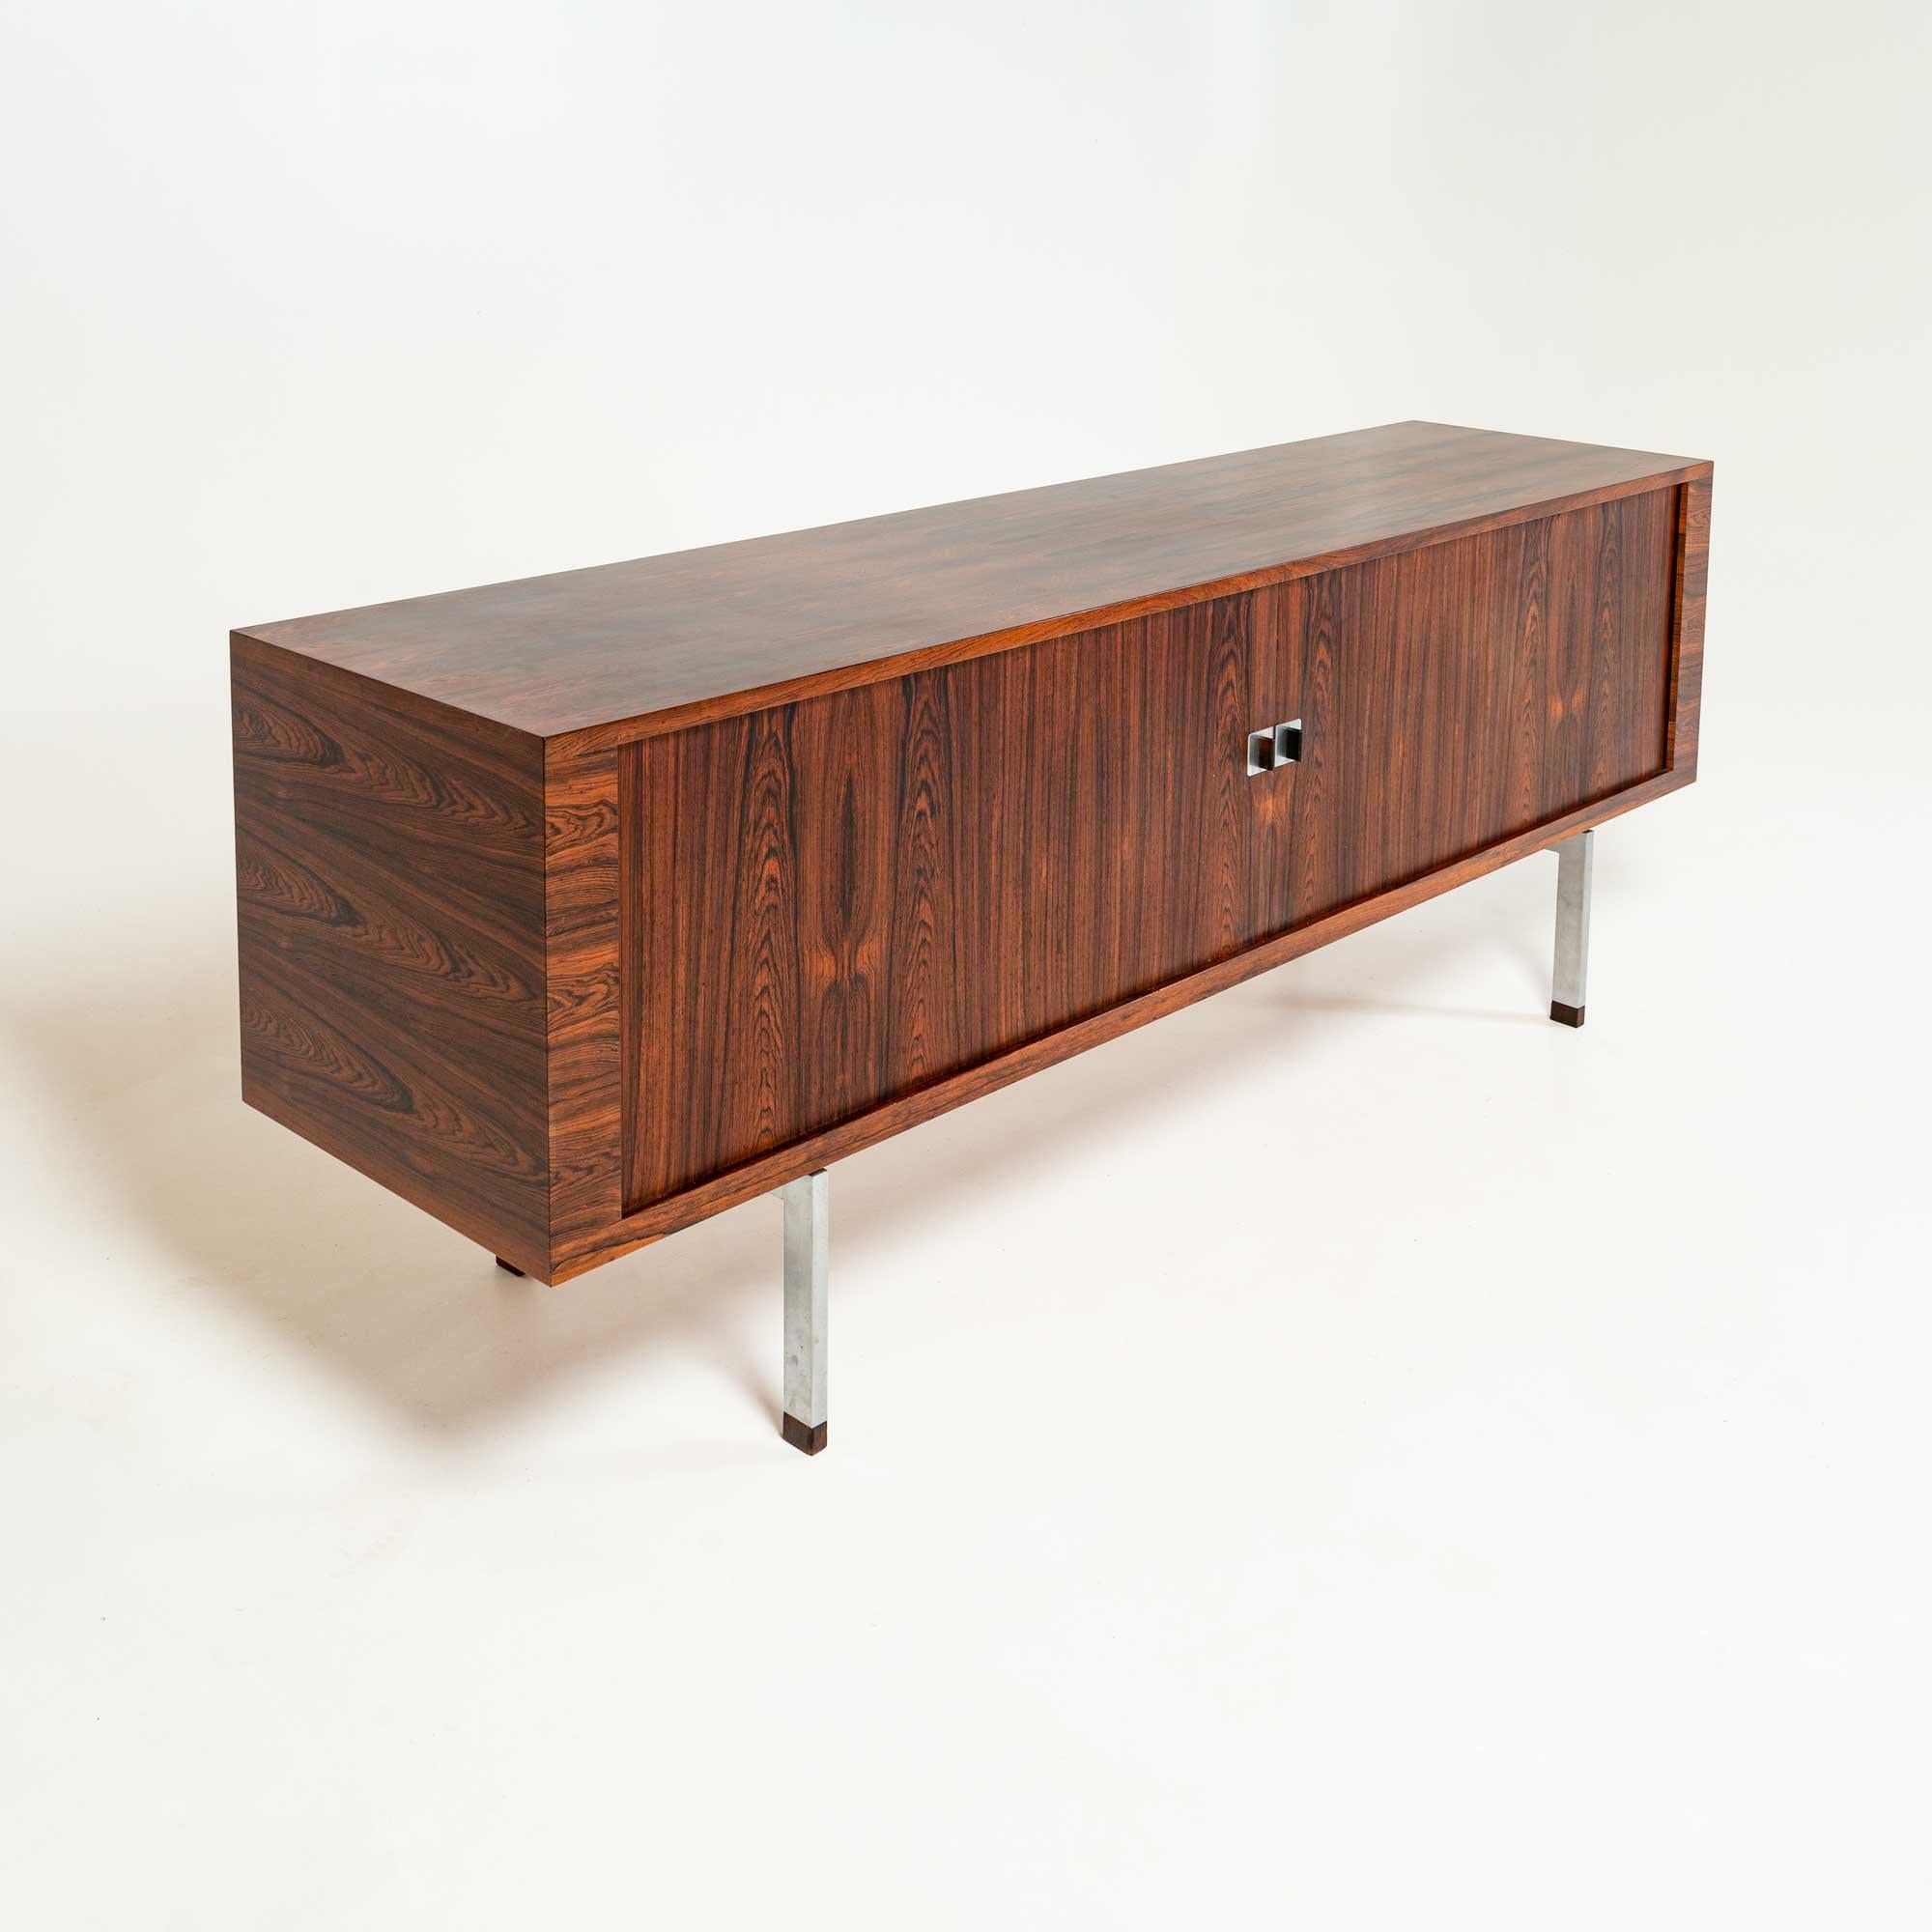 Danish Hans Wegner Ry-25 Rosewood President Sideboard/Credenza Produced by RY Møbler